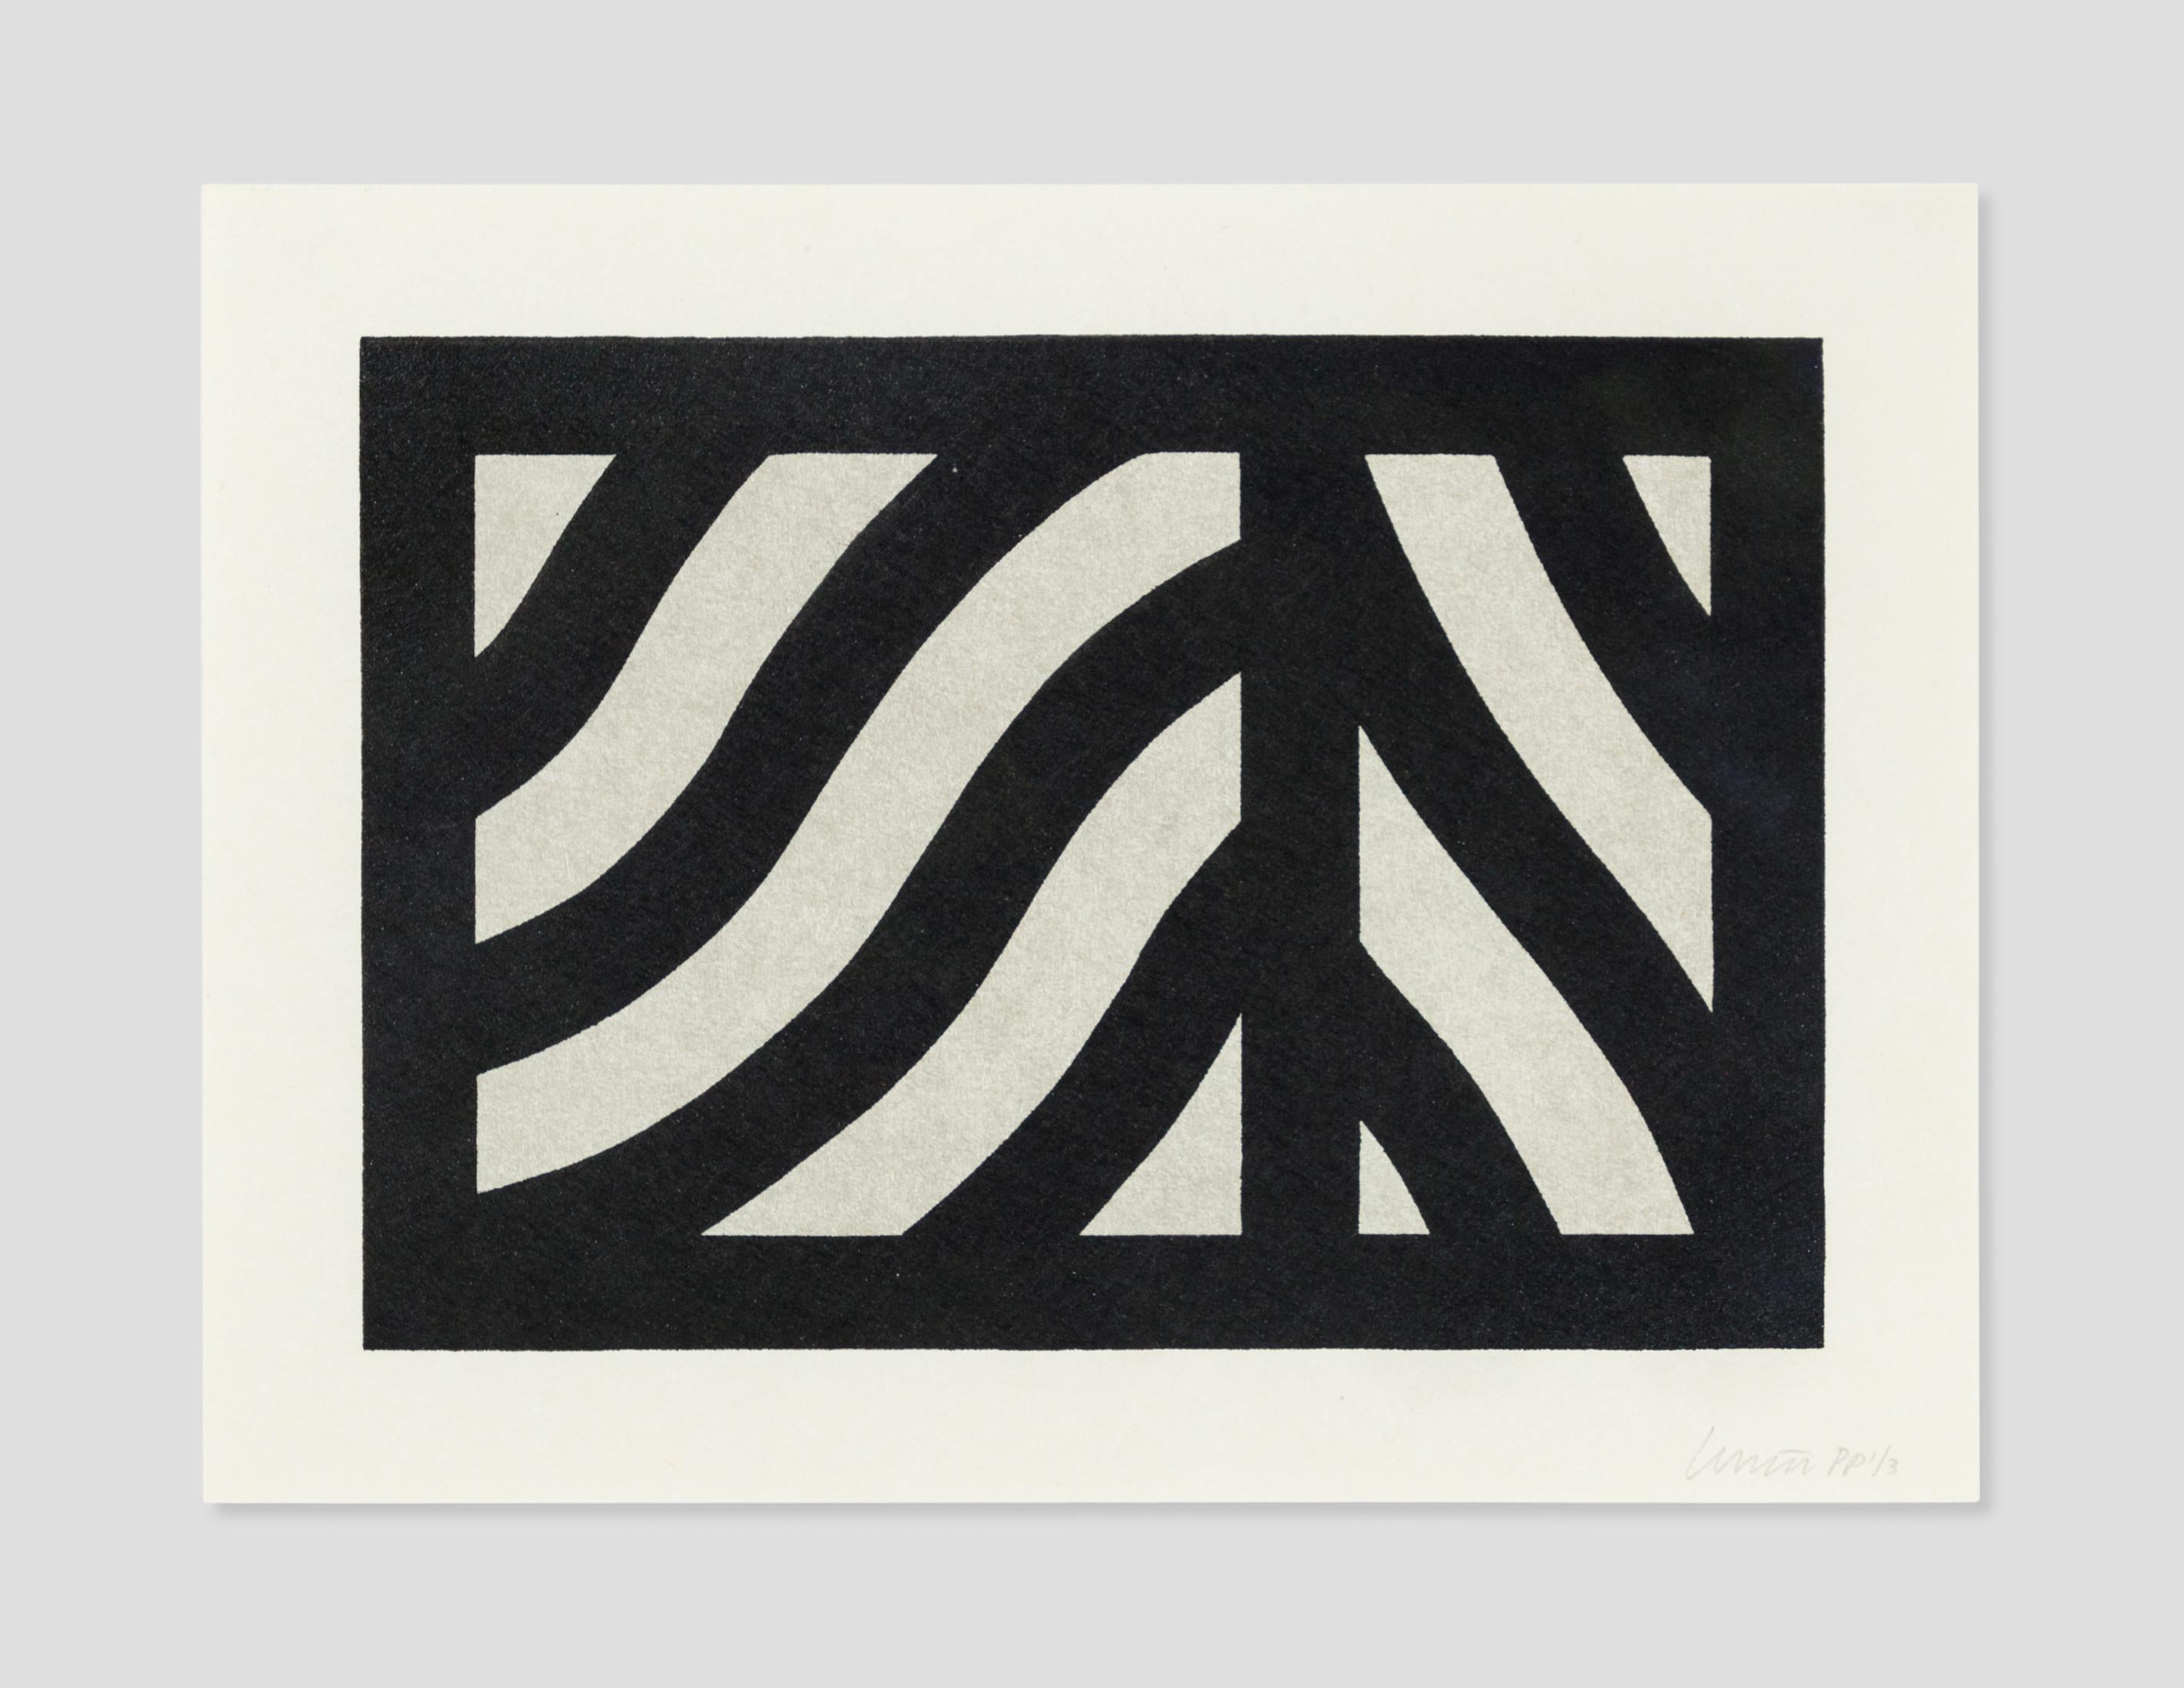 Sol LeWitt’s Curvy Bands Portfolio is a series of color woodcuts made in 1996. The artist first developed this motif in a series of gouache paintings that were inspired by a trip to Italy in the 1980’s. He picked up a brush and began painting